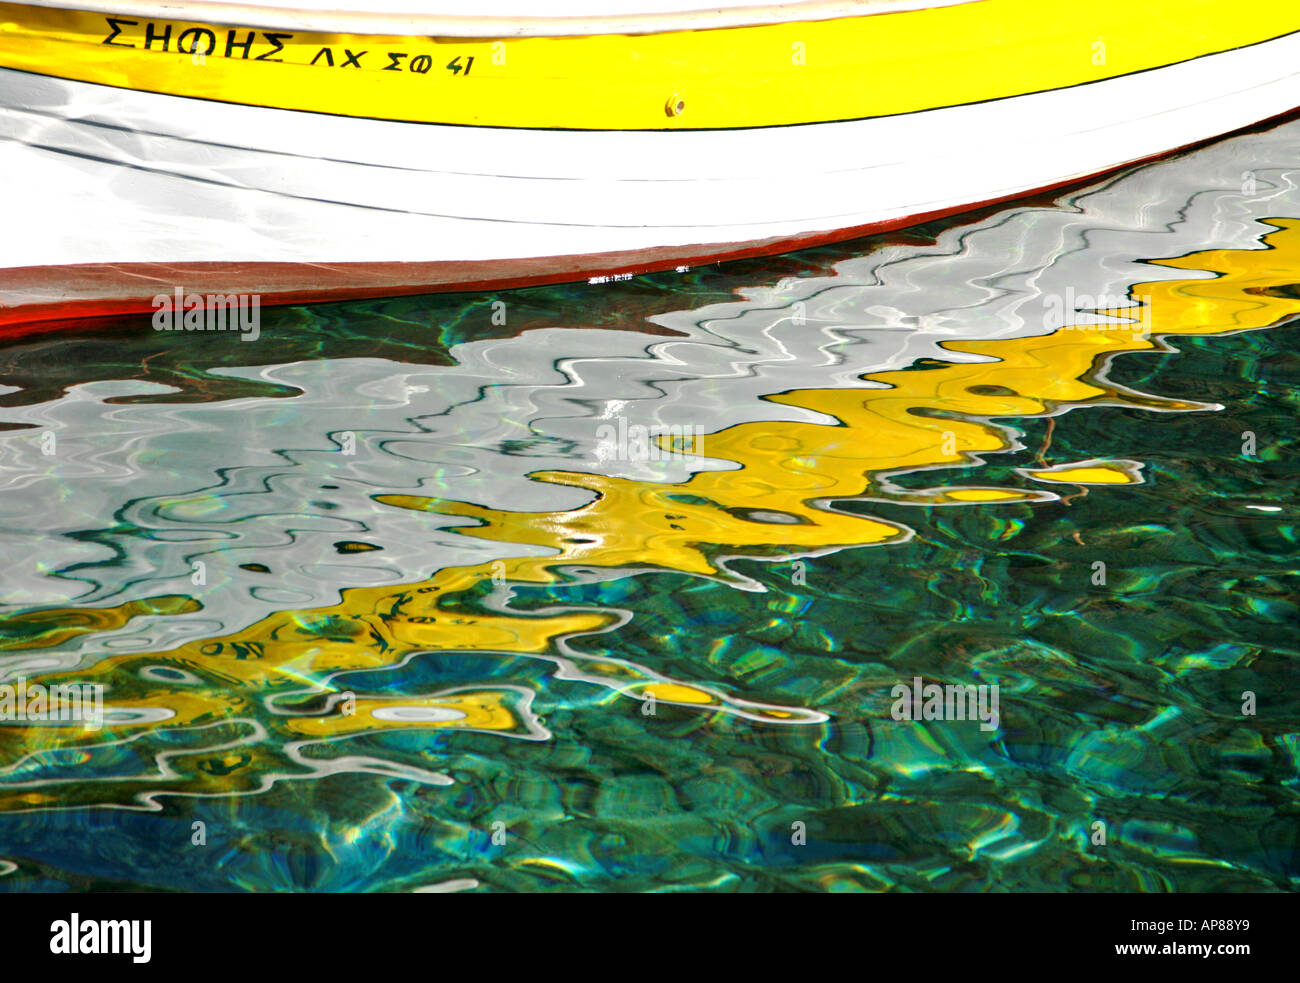 Reflections on a yellow boat Stock Photo